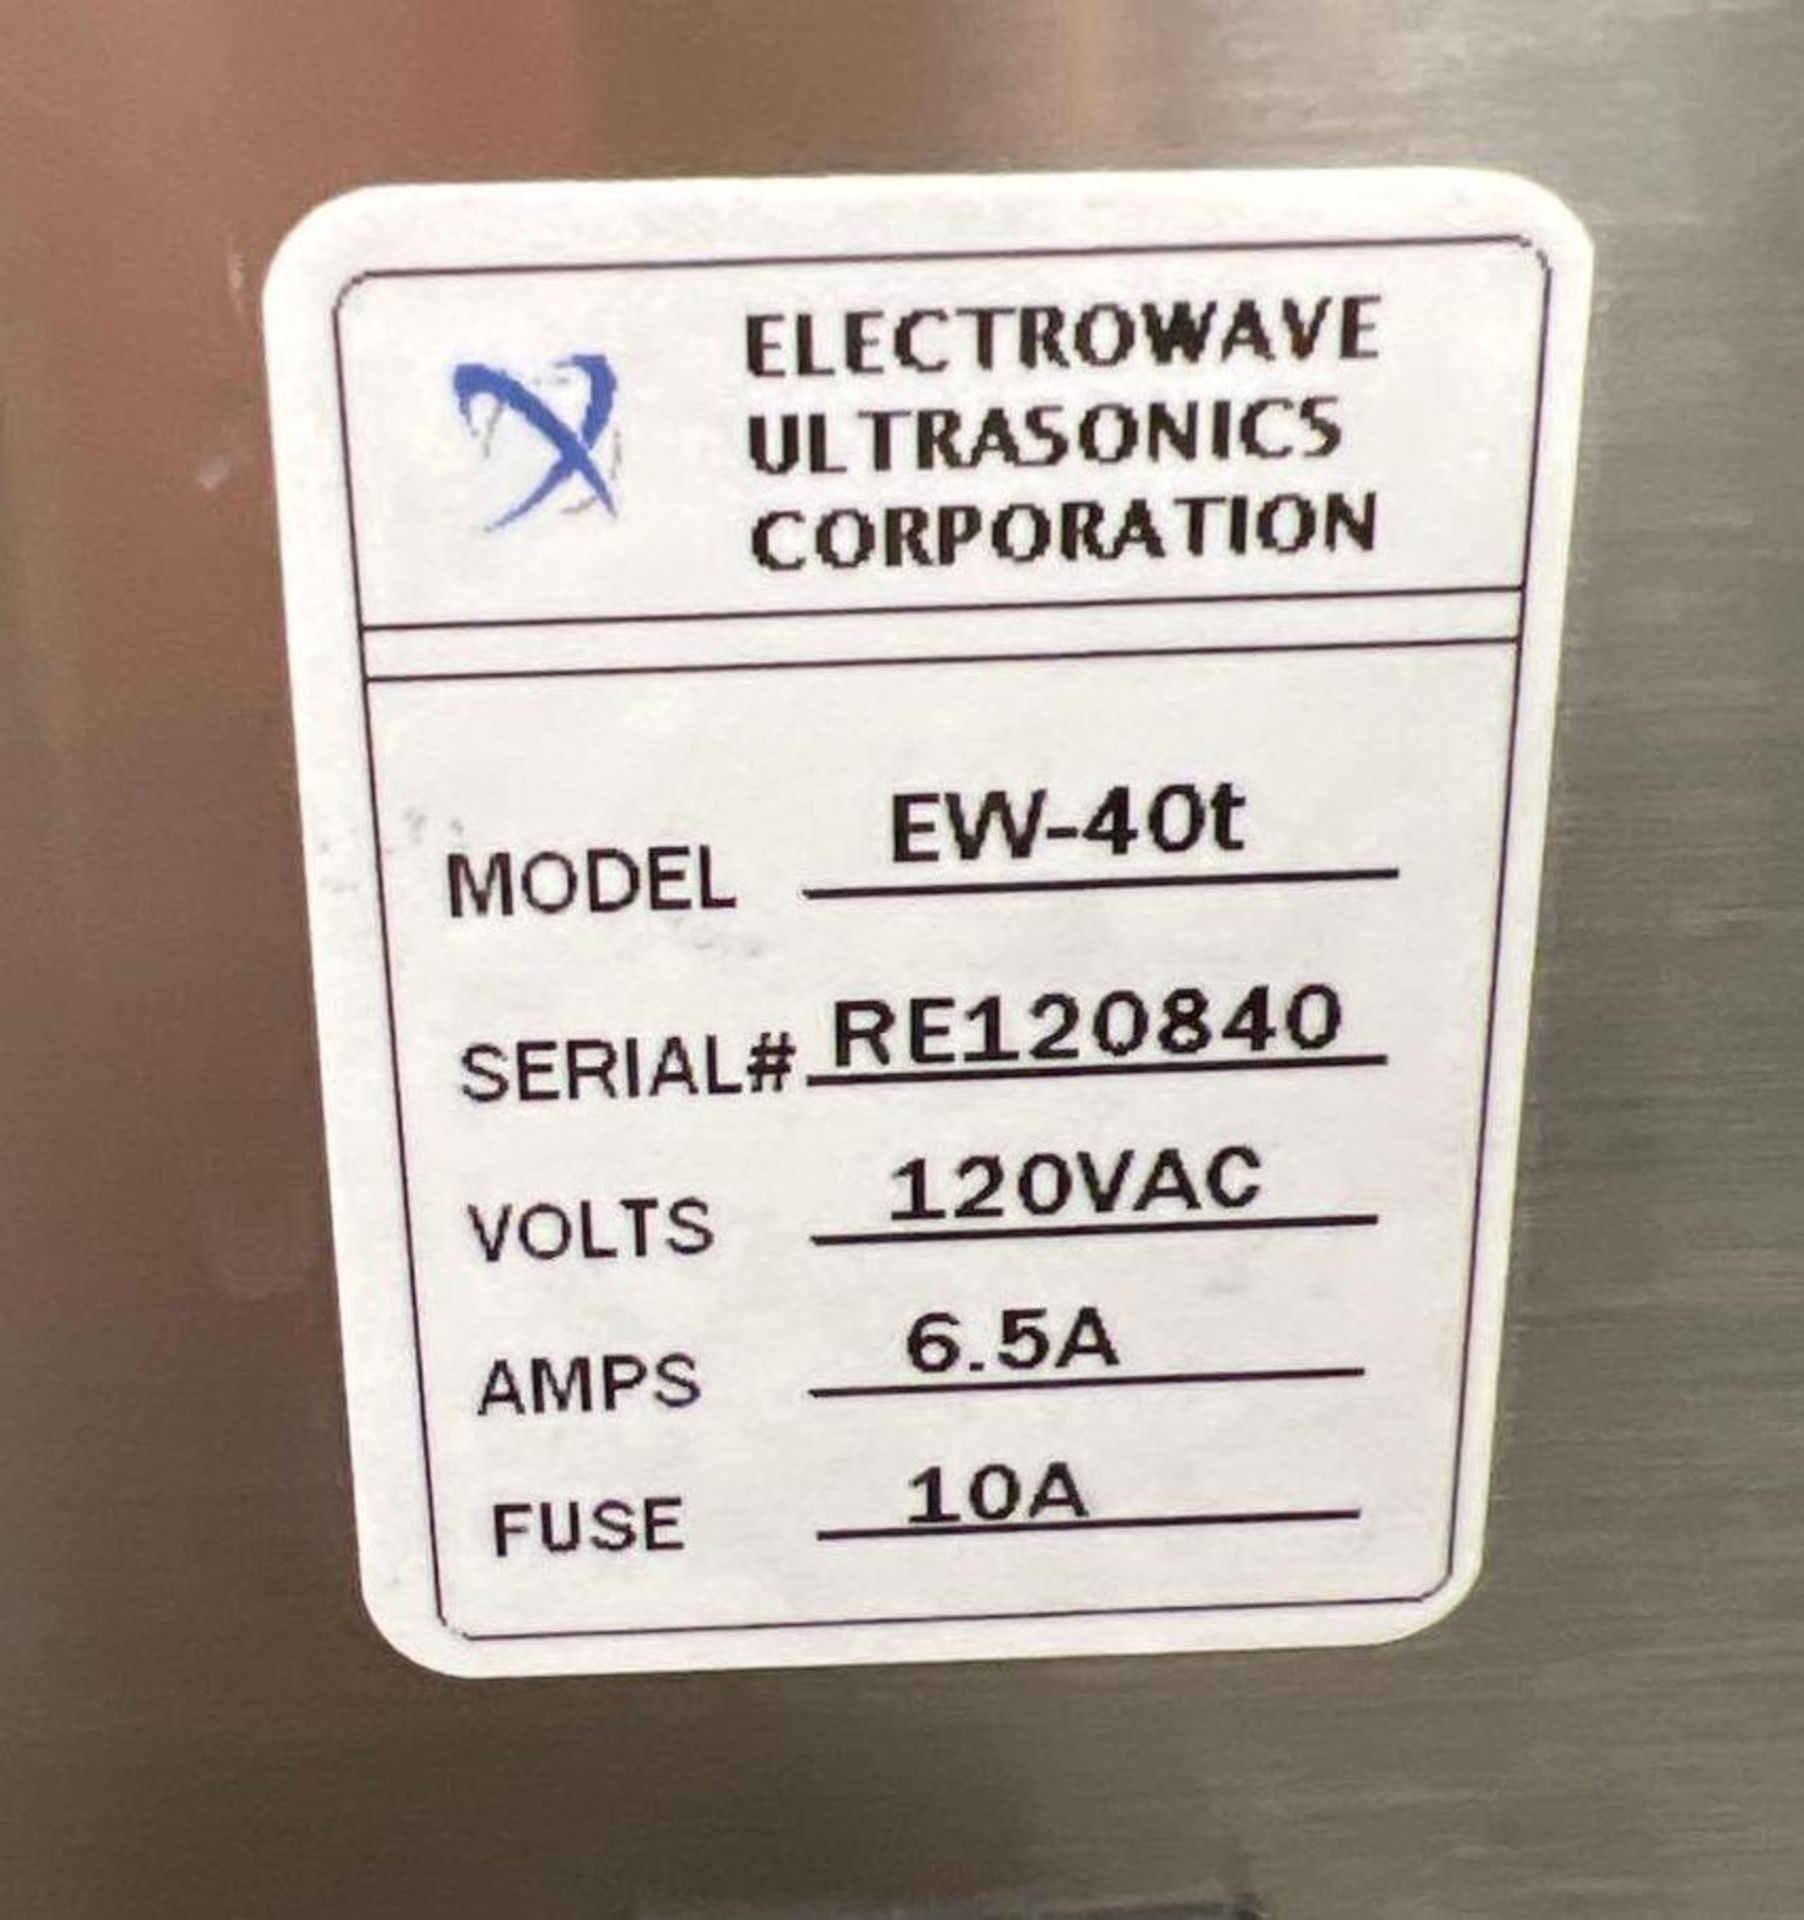 Electrowave Ultrasonic Cleaning System, Model # EW-40t - Image 2 of 4